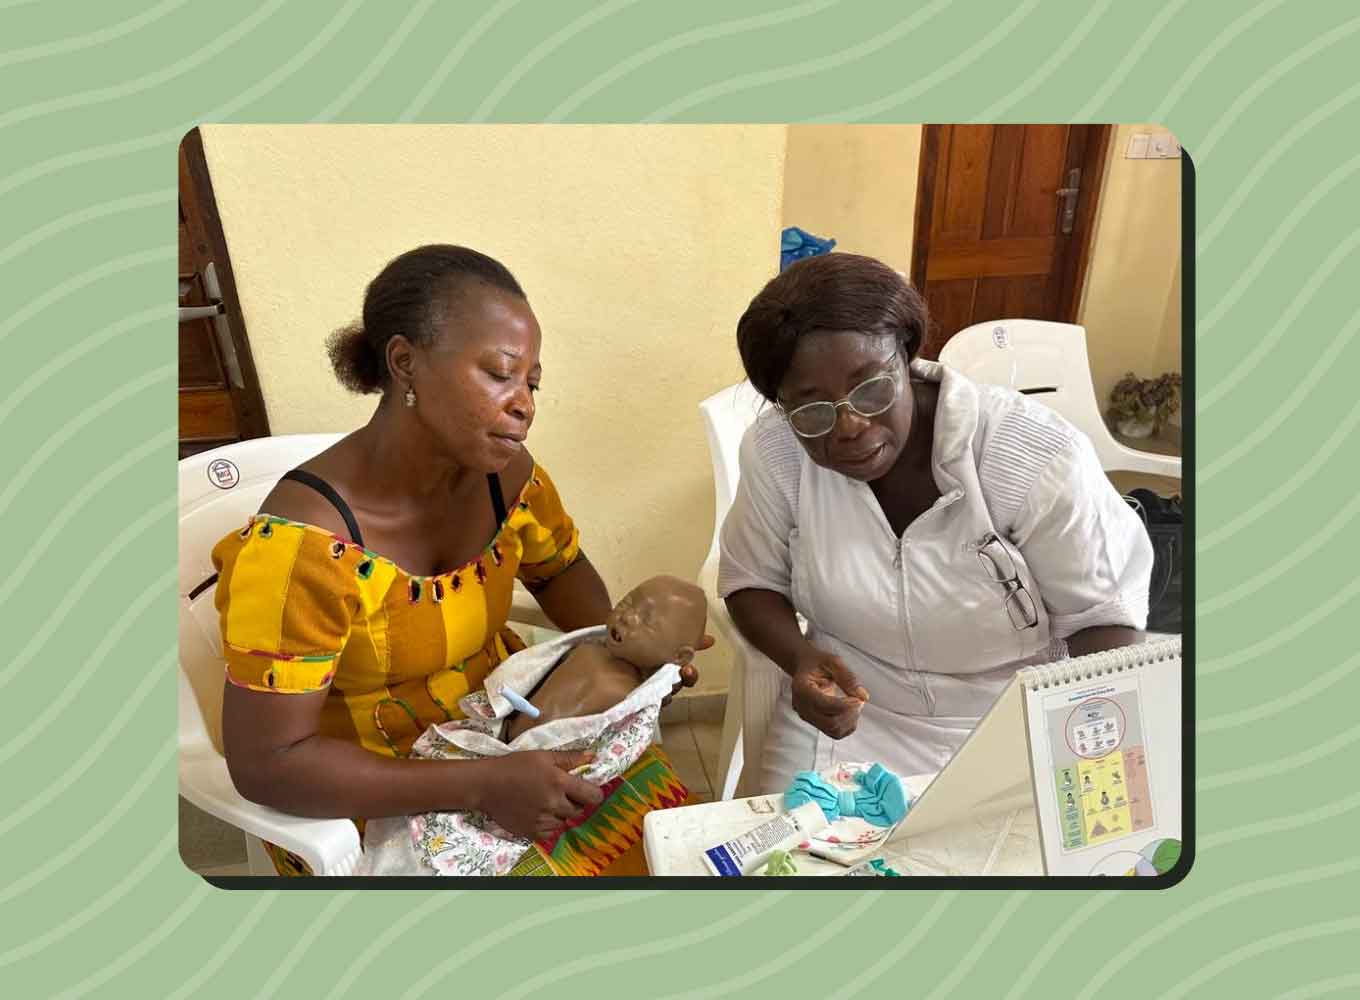 Two African women study neonatal care, one reading educational materials, while the other holds an infant simulator.